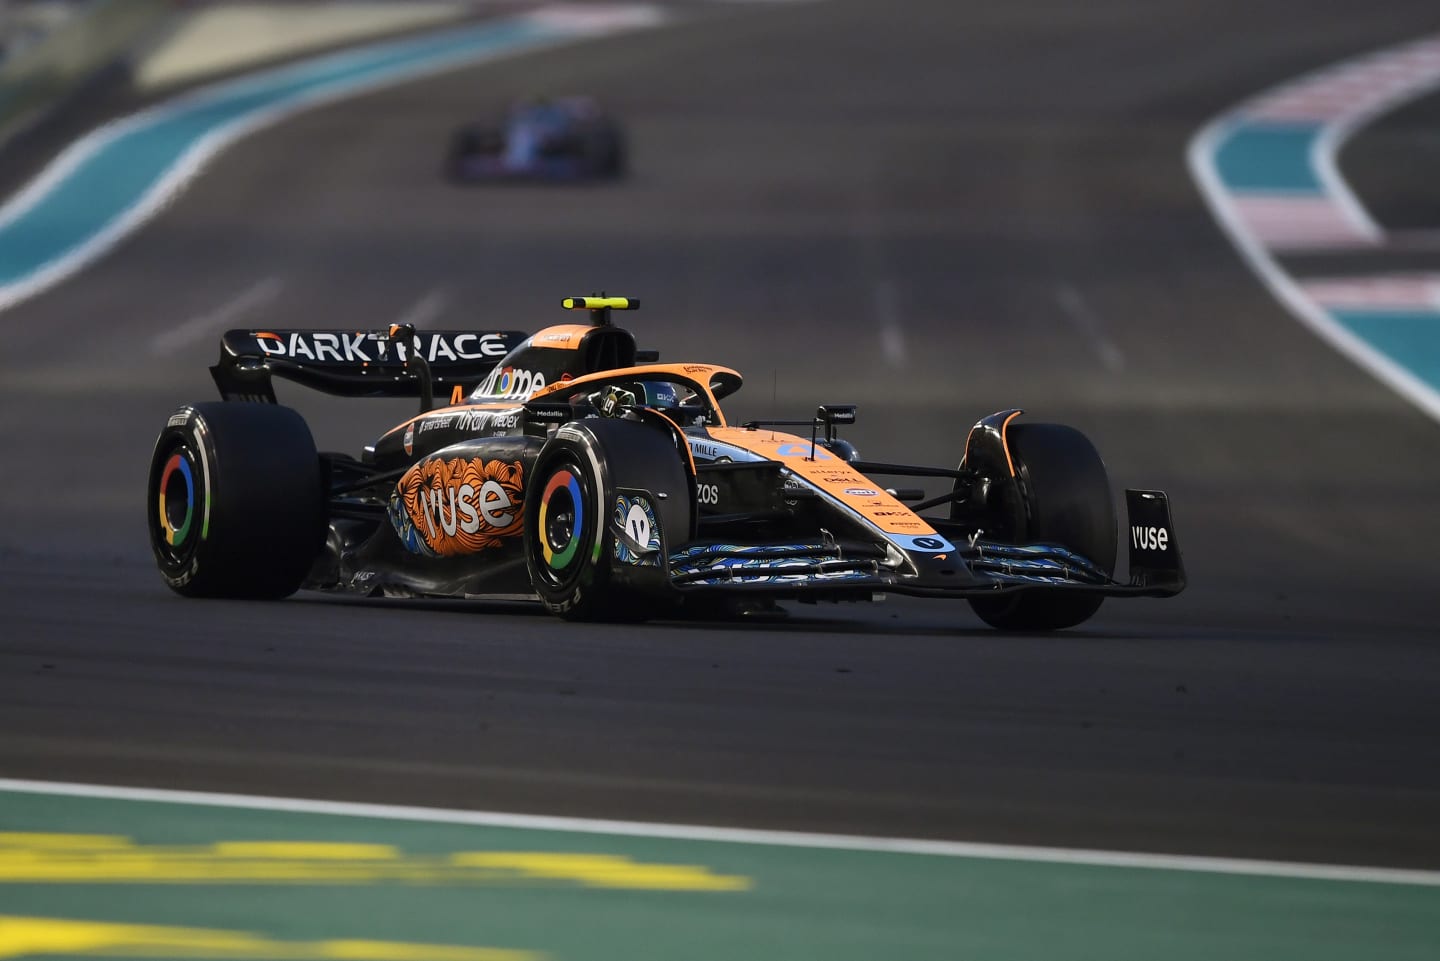 ABU DHABI, UNITED ARAB EMIRATES - NOVEMBER 20: Lando Norris of Great Britain driving the (4) McLaren MCL36 Mercedes on track during the F1 Grand Prix of Abu Dhabi at Yas Marina Circuit on November 20, 2022 in Abu Dhabi, United Arab Emirates. (Photo by Rudy Carezzevoli/Getty Images)